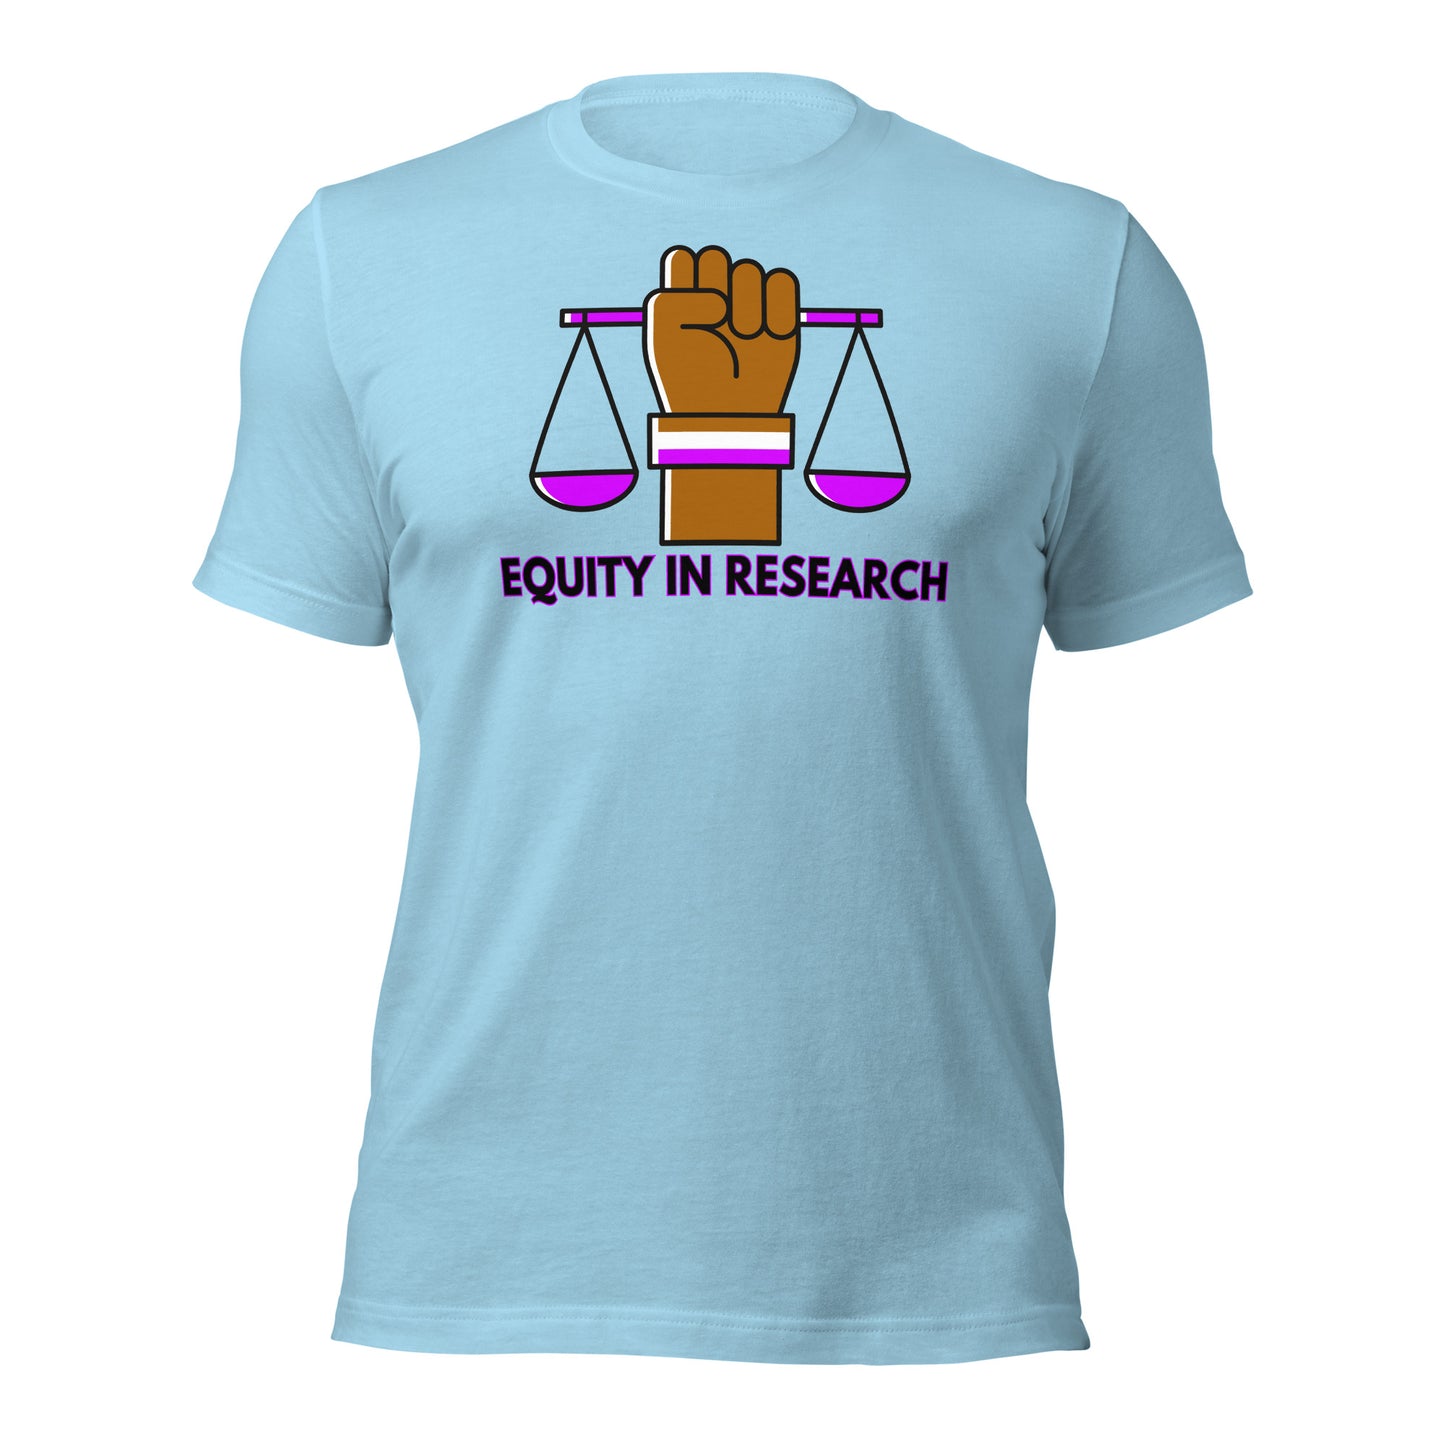 EQUITY in RESEARCH: Unisex t-shirt